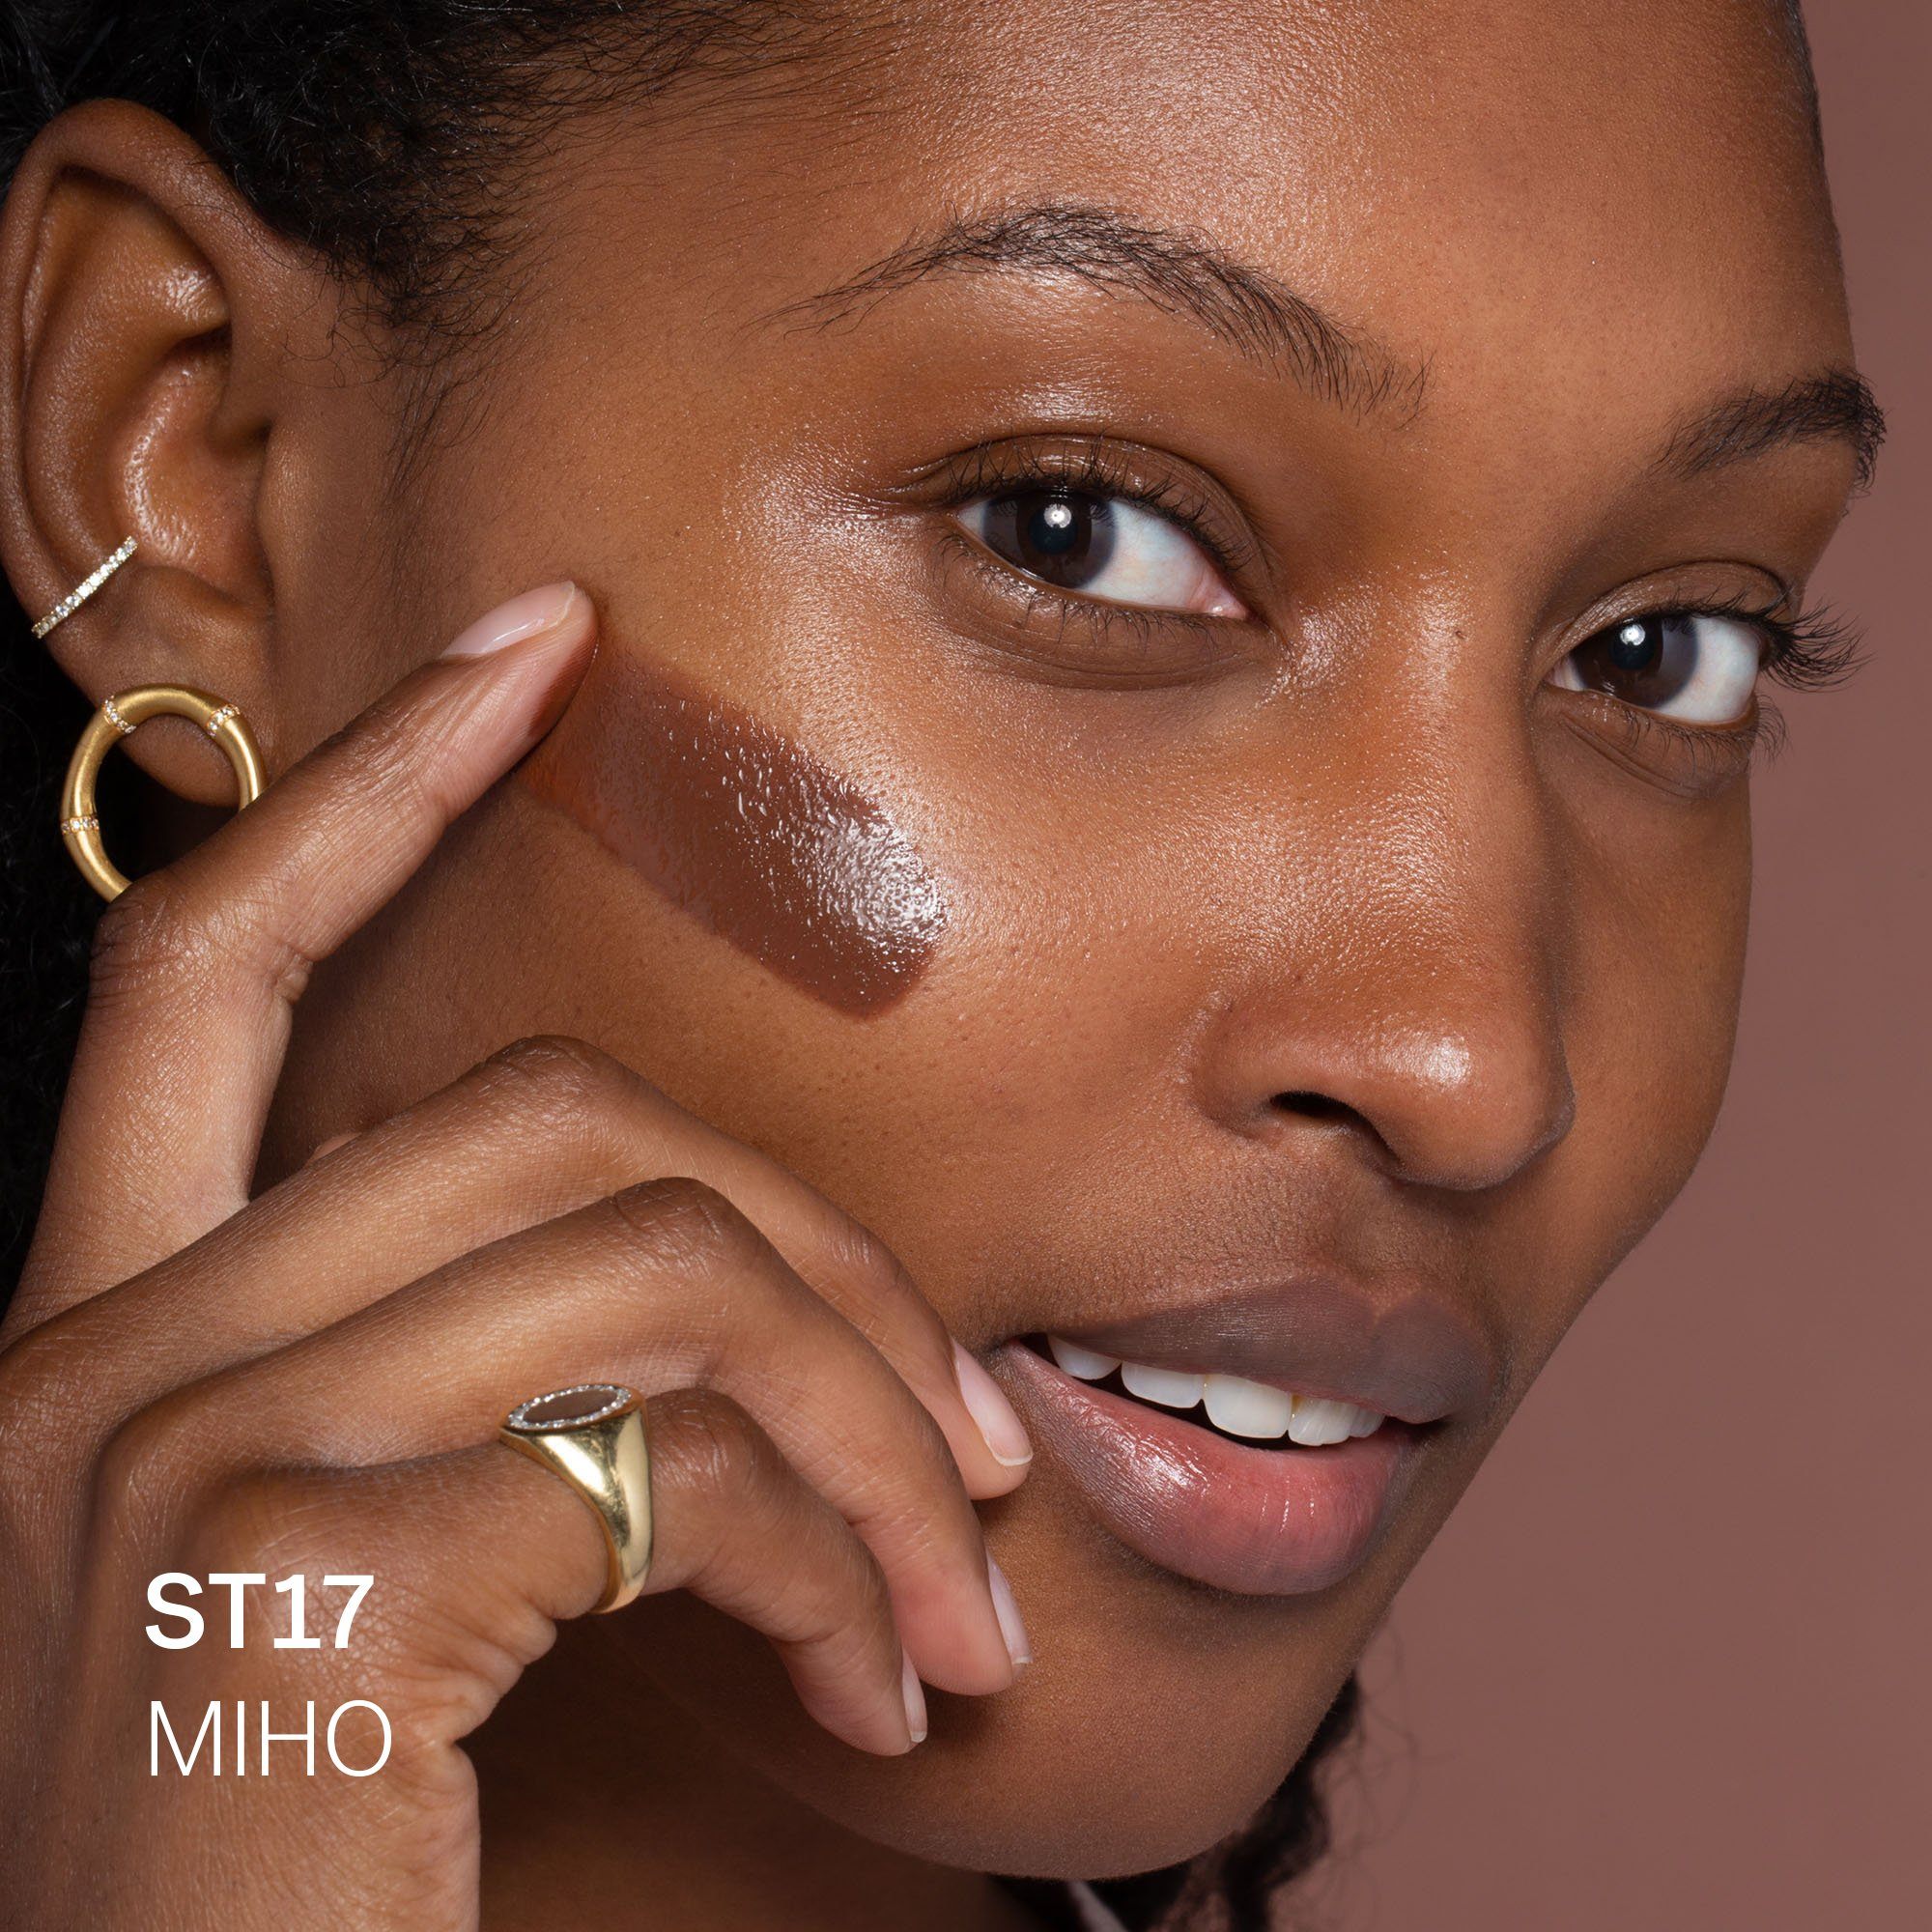 ST17 Miho (for deep skin with neutral cool undertones)